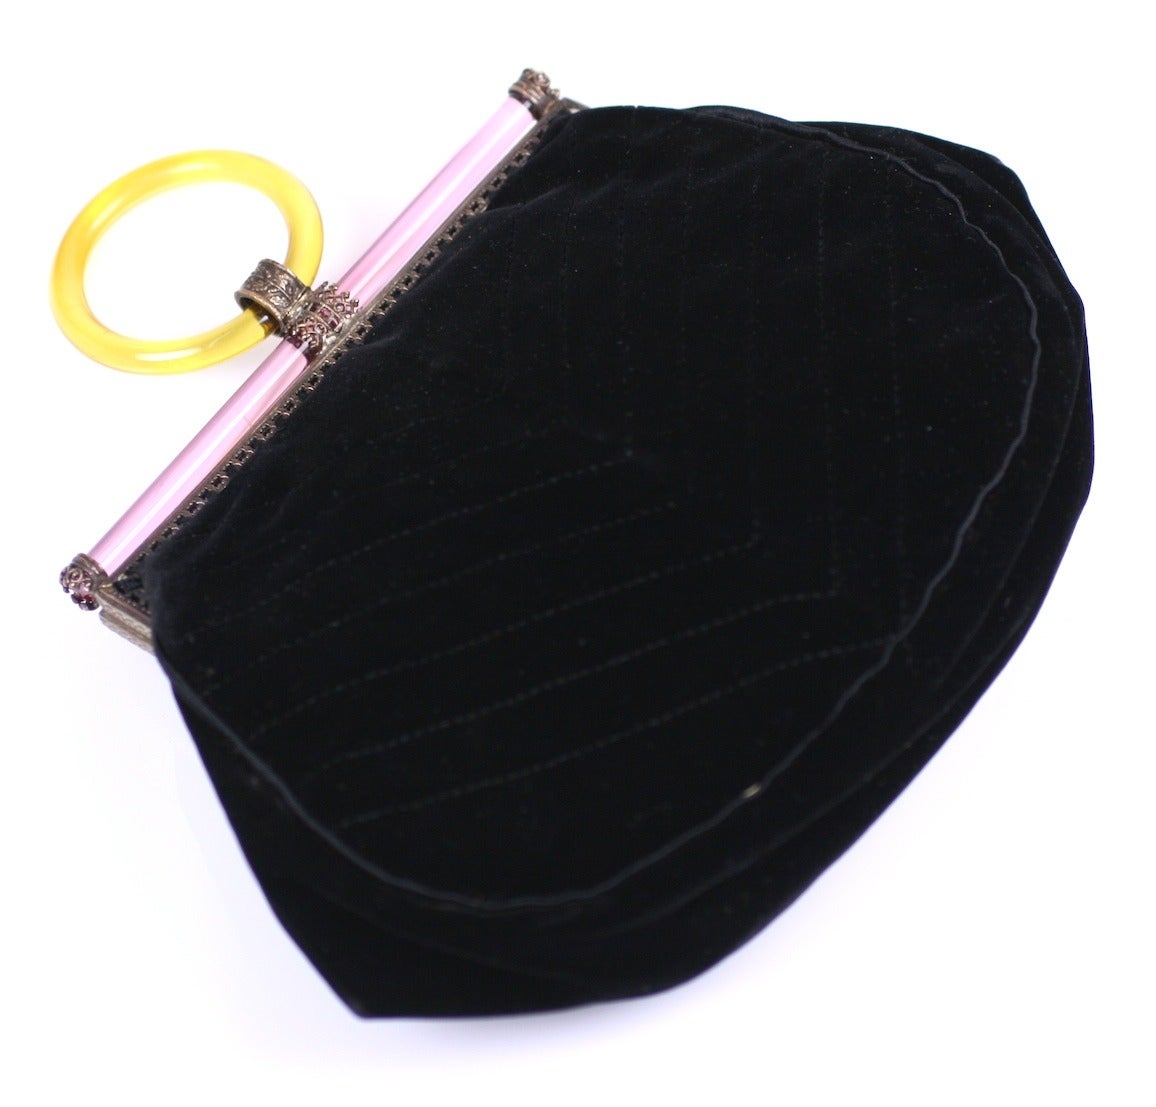 French Art Deco Crystal and Perspex Finger Clutch in quilted black silk velvet from the 1920's. A amber perspex finger ring allows wearer to dangle purse. 
A rosey pink glass rod frames the top edge along with a crystal rod purse pull.
Extremely